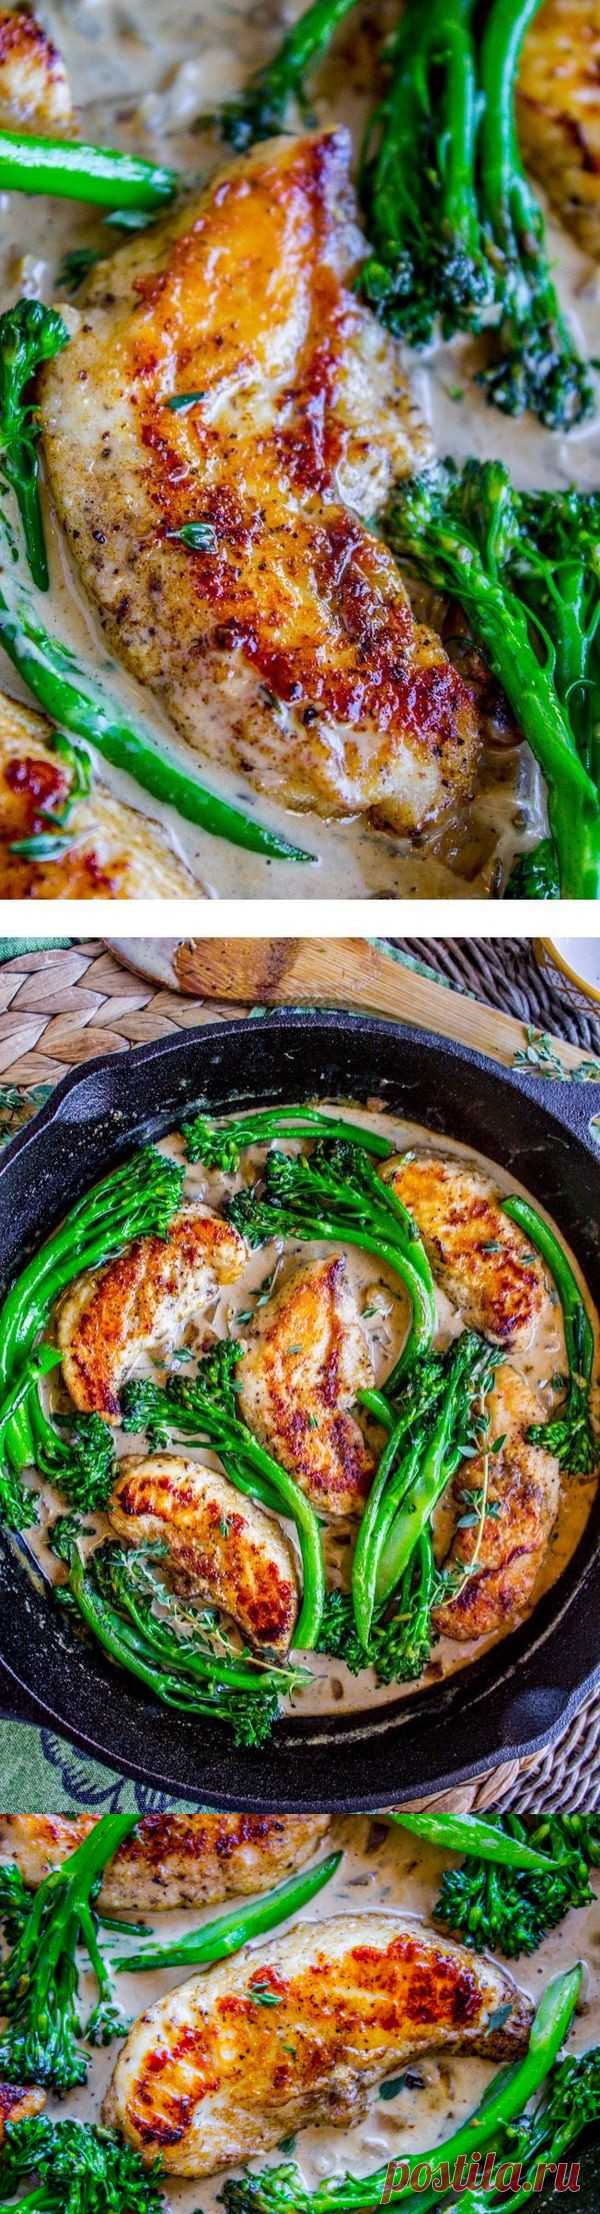 Pan-Seared Chicken and Broccolini in Creamy Mustard Sauce